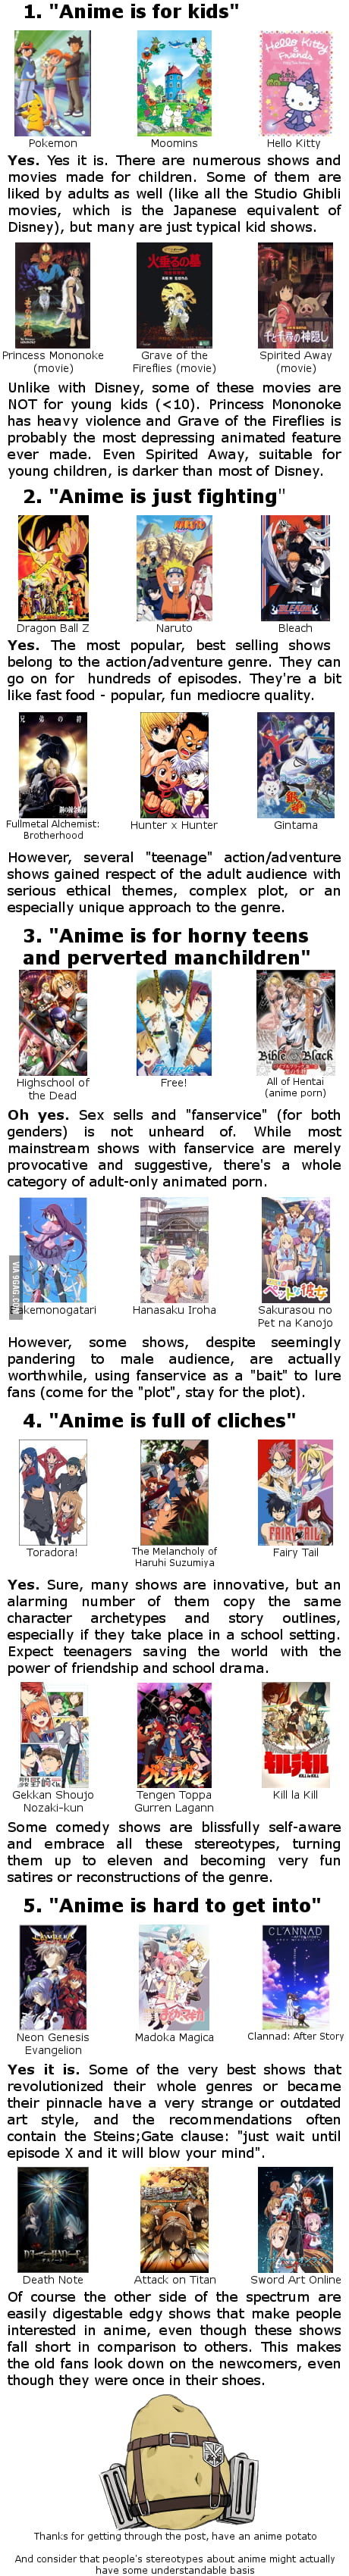 IFunny Anime pfp ARCHETYPES I The Pedaphile Giant Enthusiast 'The Pedophile  The Pedepitle The Pedophiig The Padophiie 'The The The The Pedophiie The  Padaphiie The Pedepile The Pedopiie ThePedopiile -'The 'The 